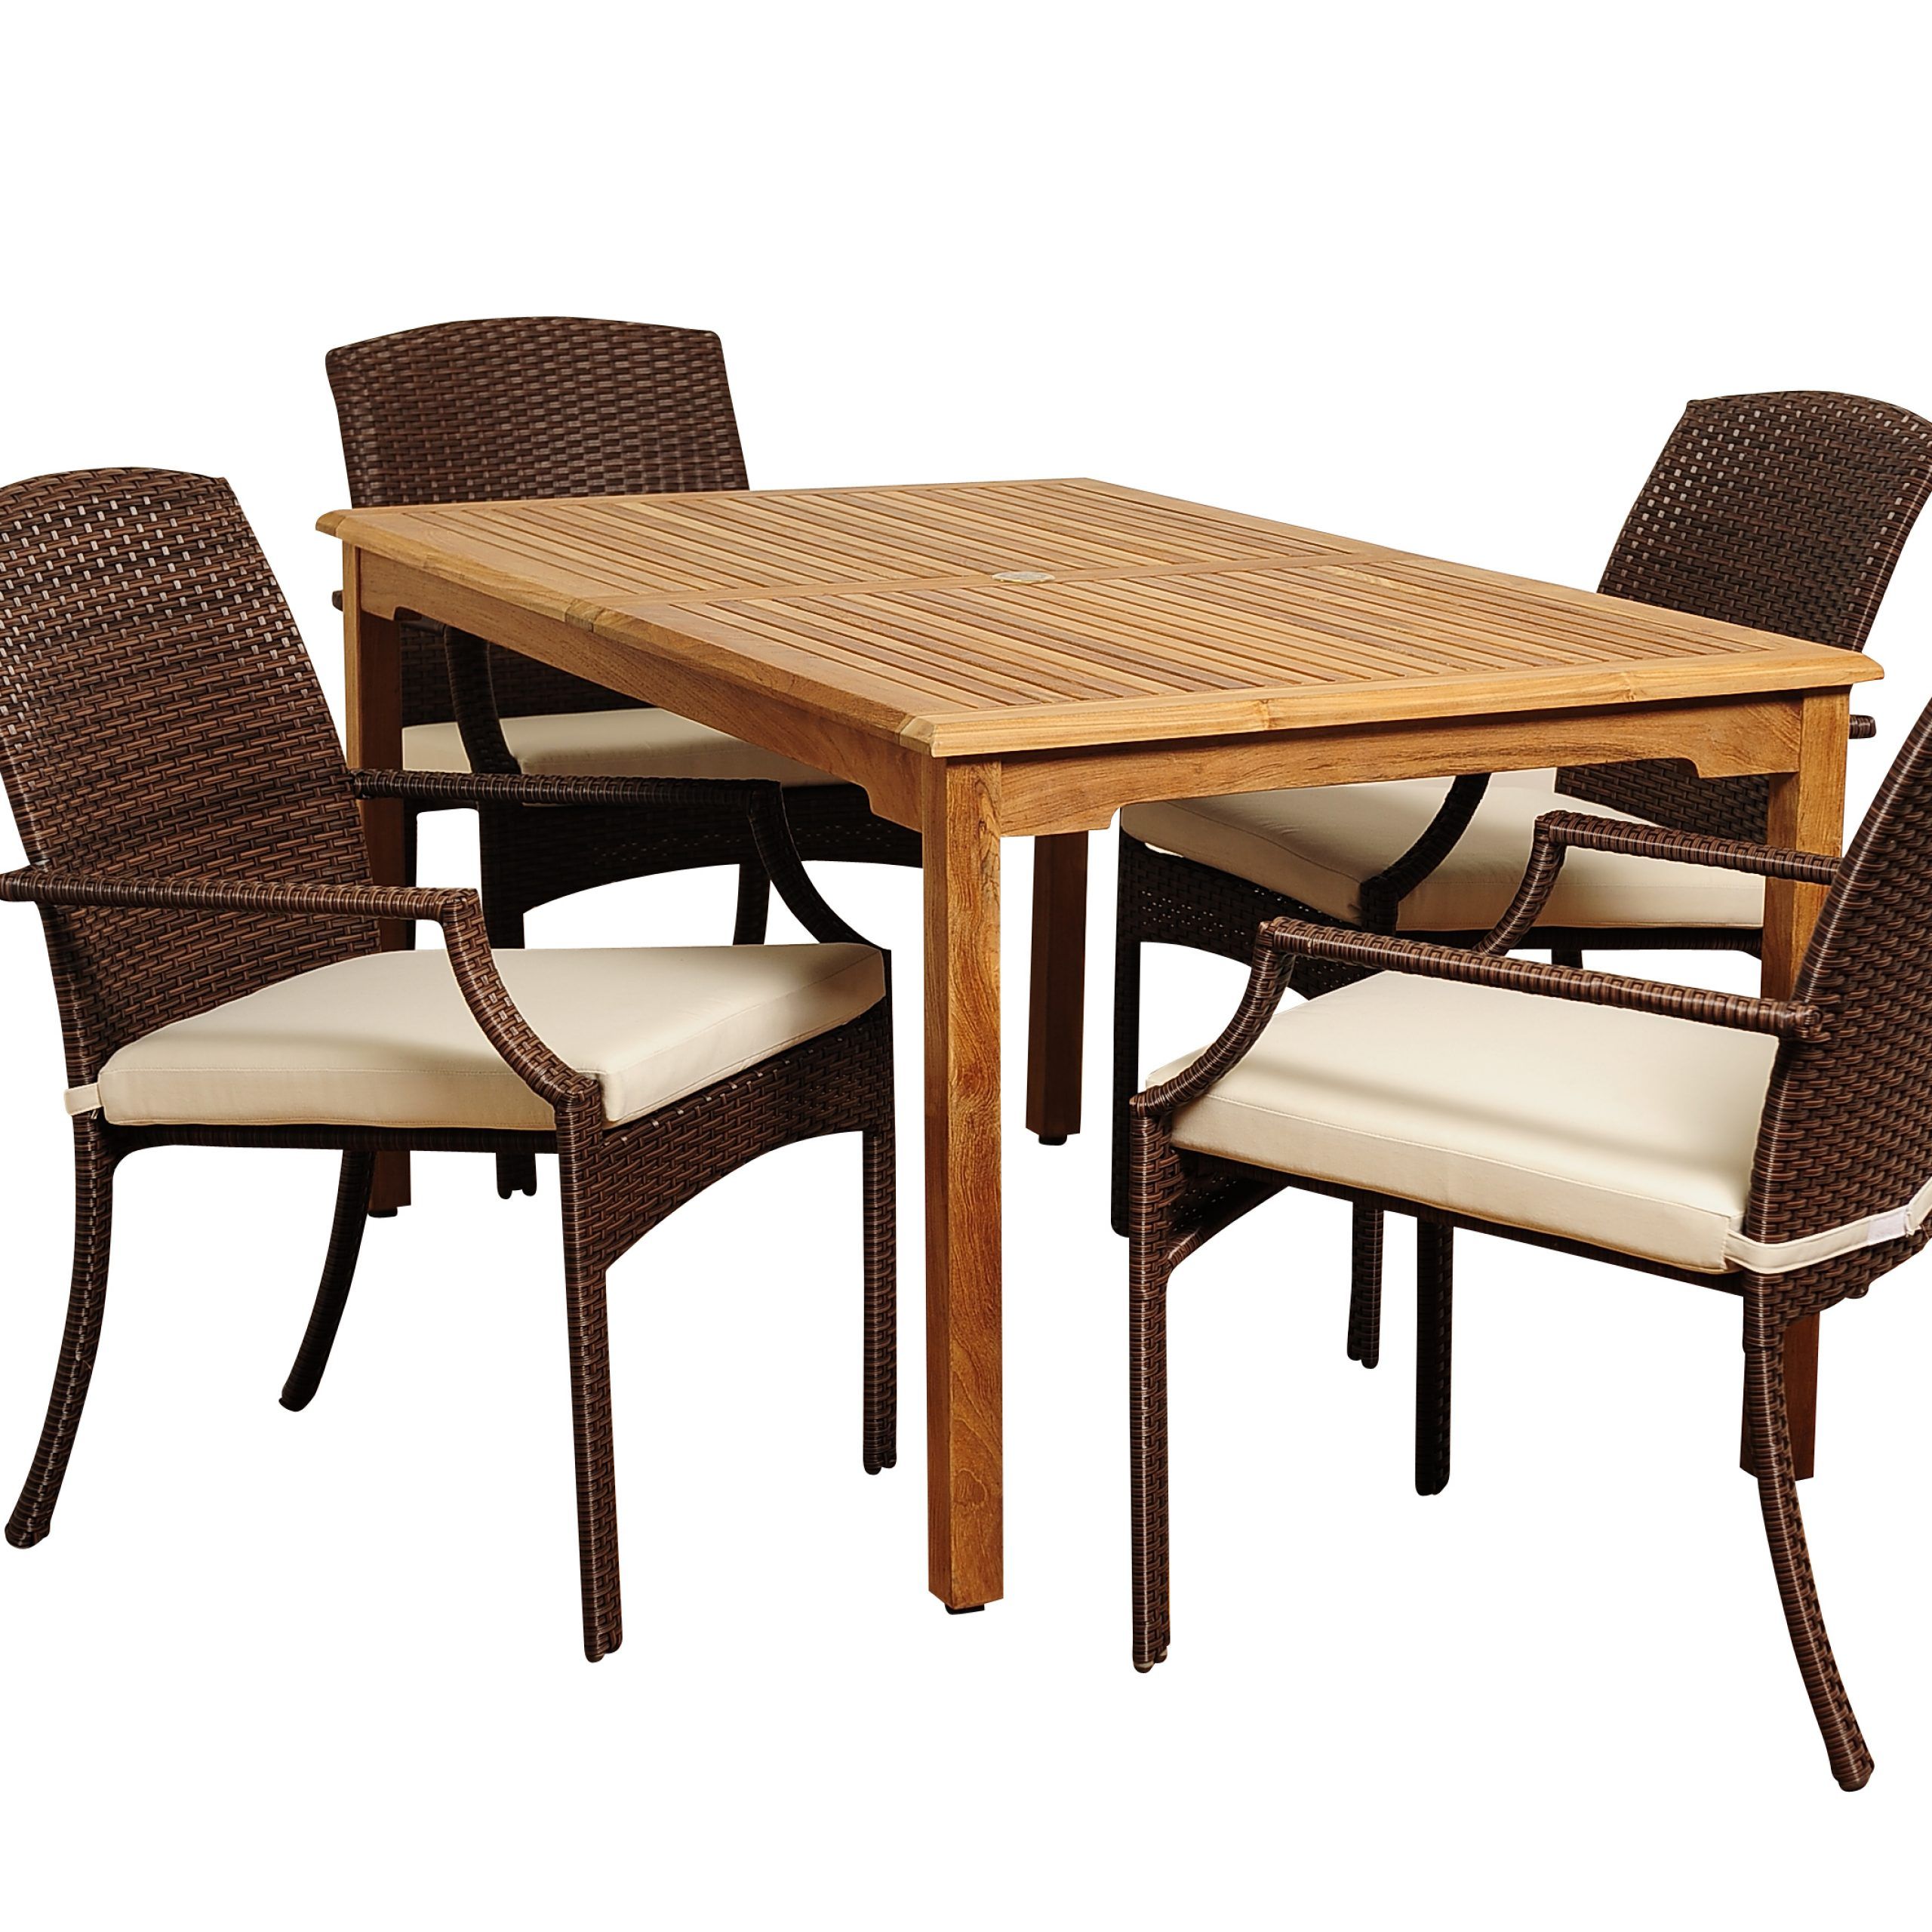 Most Current Off White Cushion Patio Dining Sets Within Vincenzo 5 Piece Teak/wicker Rectangular Dining Set With Off White (View 1 of 15)